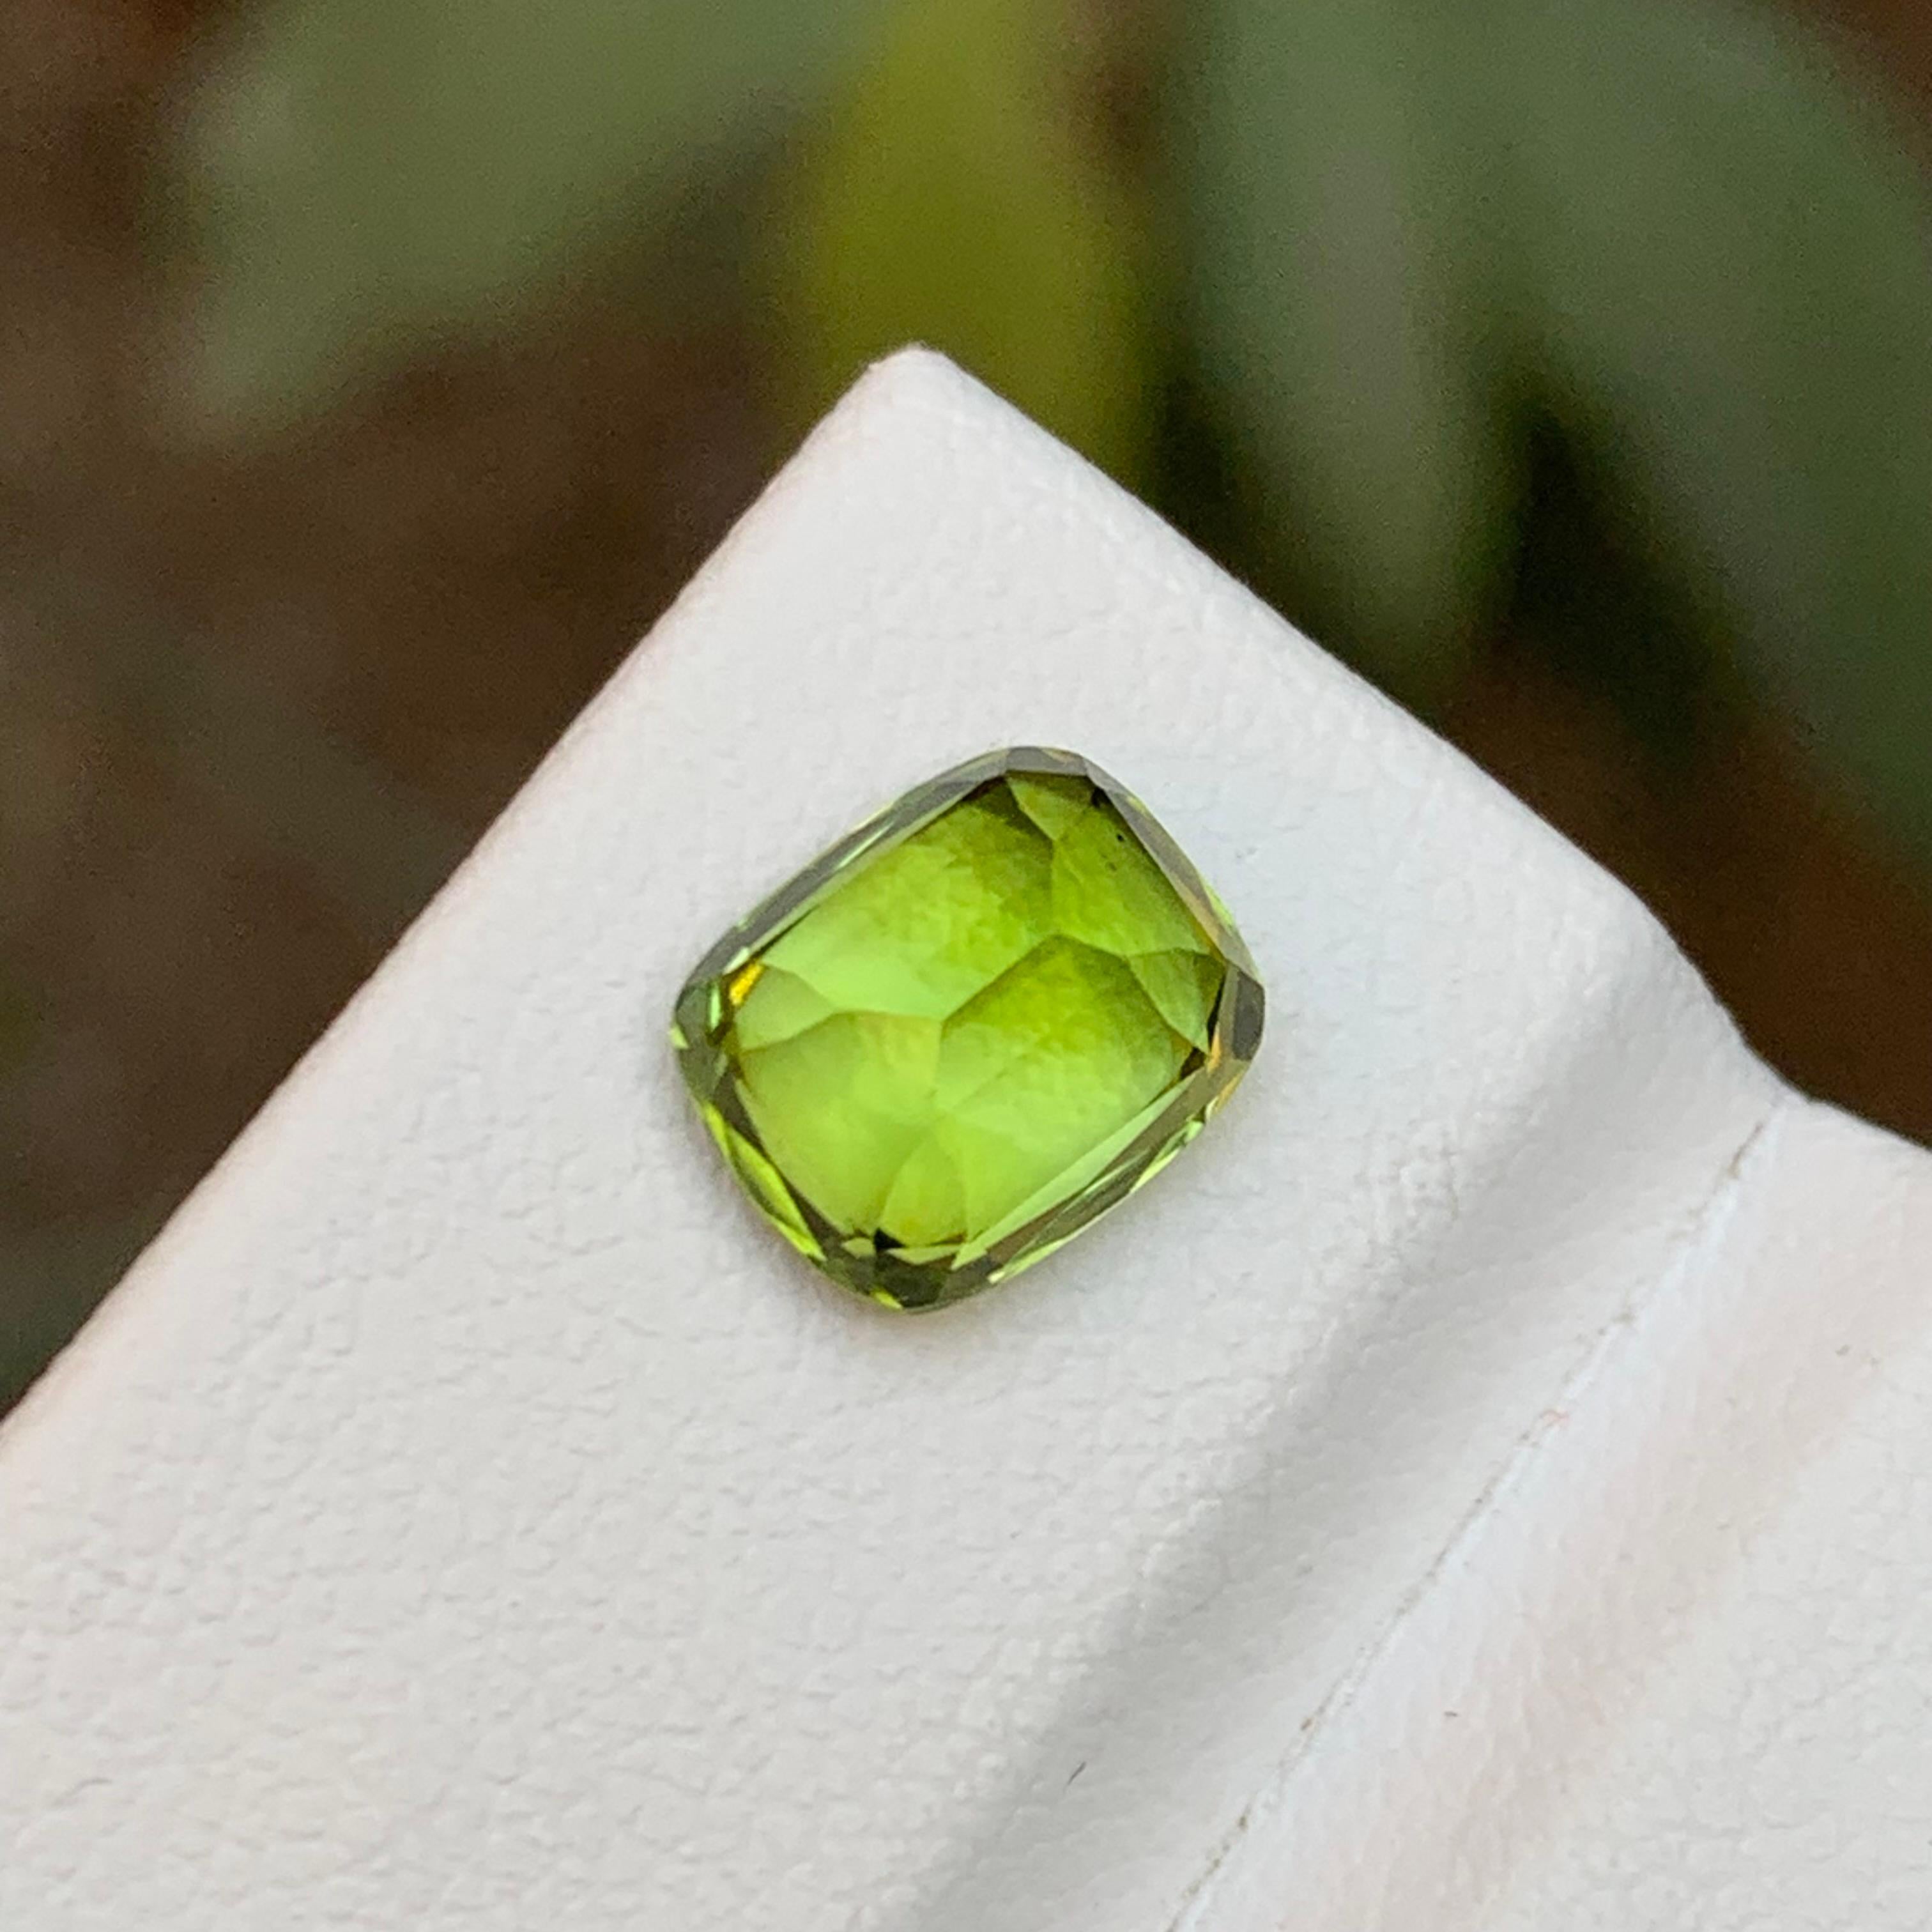 Women's or Men's Rare Green Natural Peridot Loose Gemstone, 2.30 Ct Cushion Cut Ideal for Ring For Sale